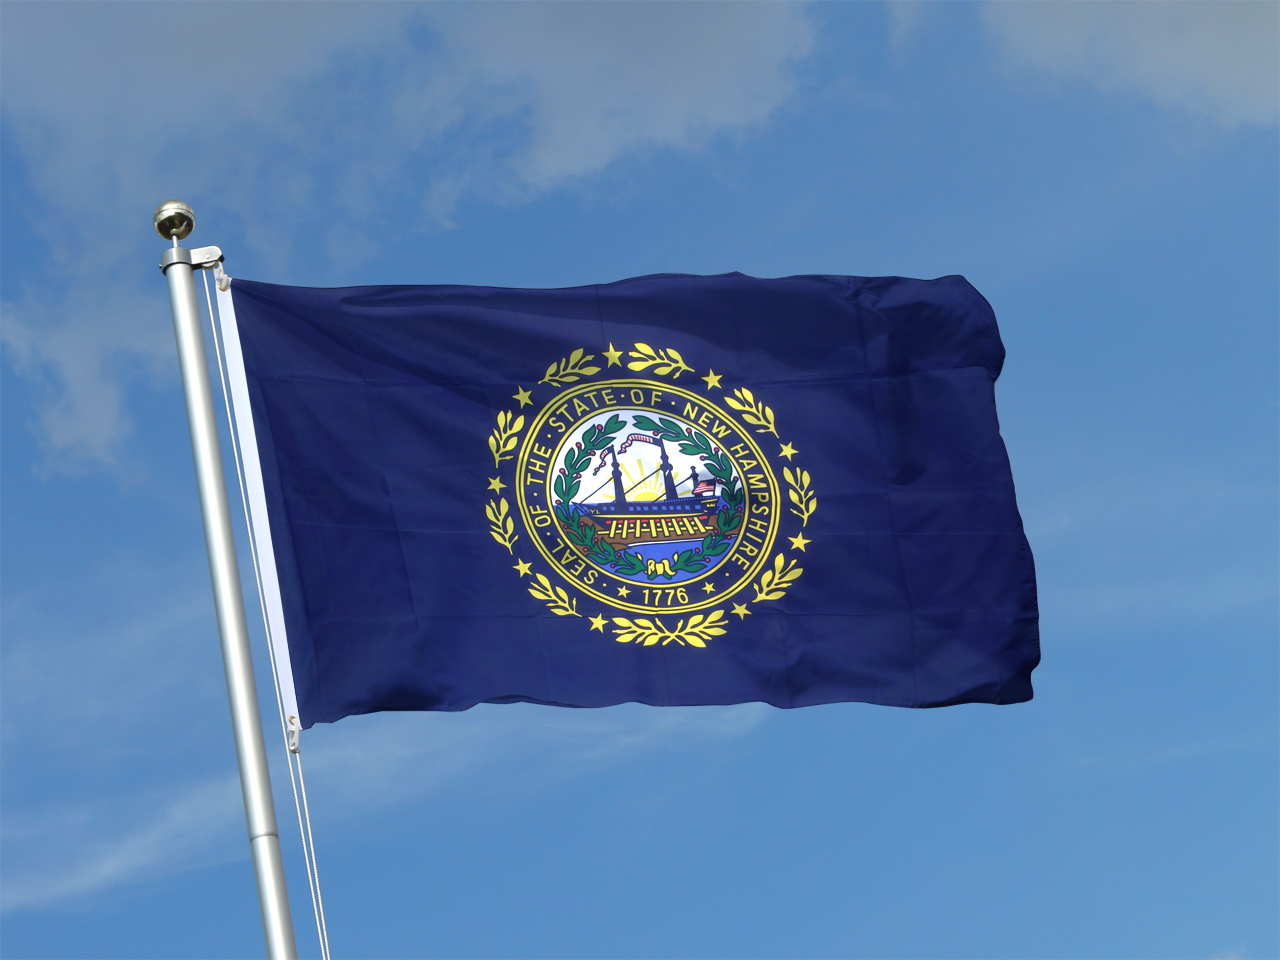 New Hampshire Flag For Sale Buy Online At Royal Flags